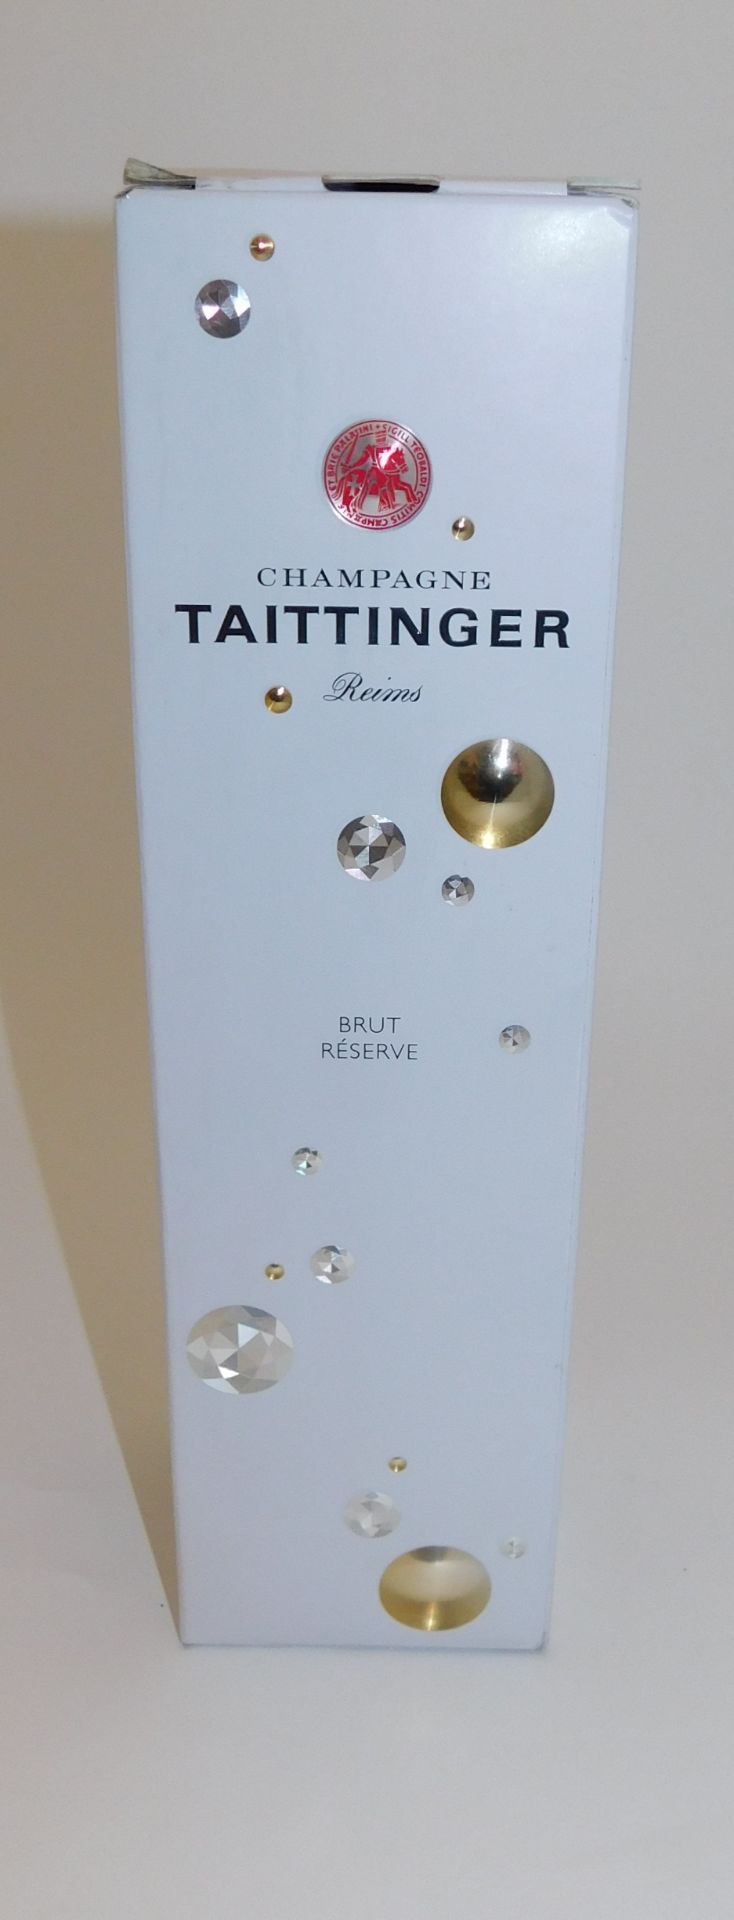 6 Bottles of Tattinger Brut Reserve Champagne, 750ml, Individually Boxed (Located Stockport – See - Image 3 of 3